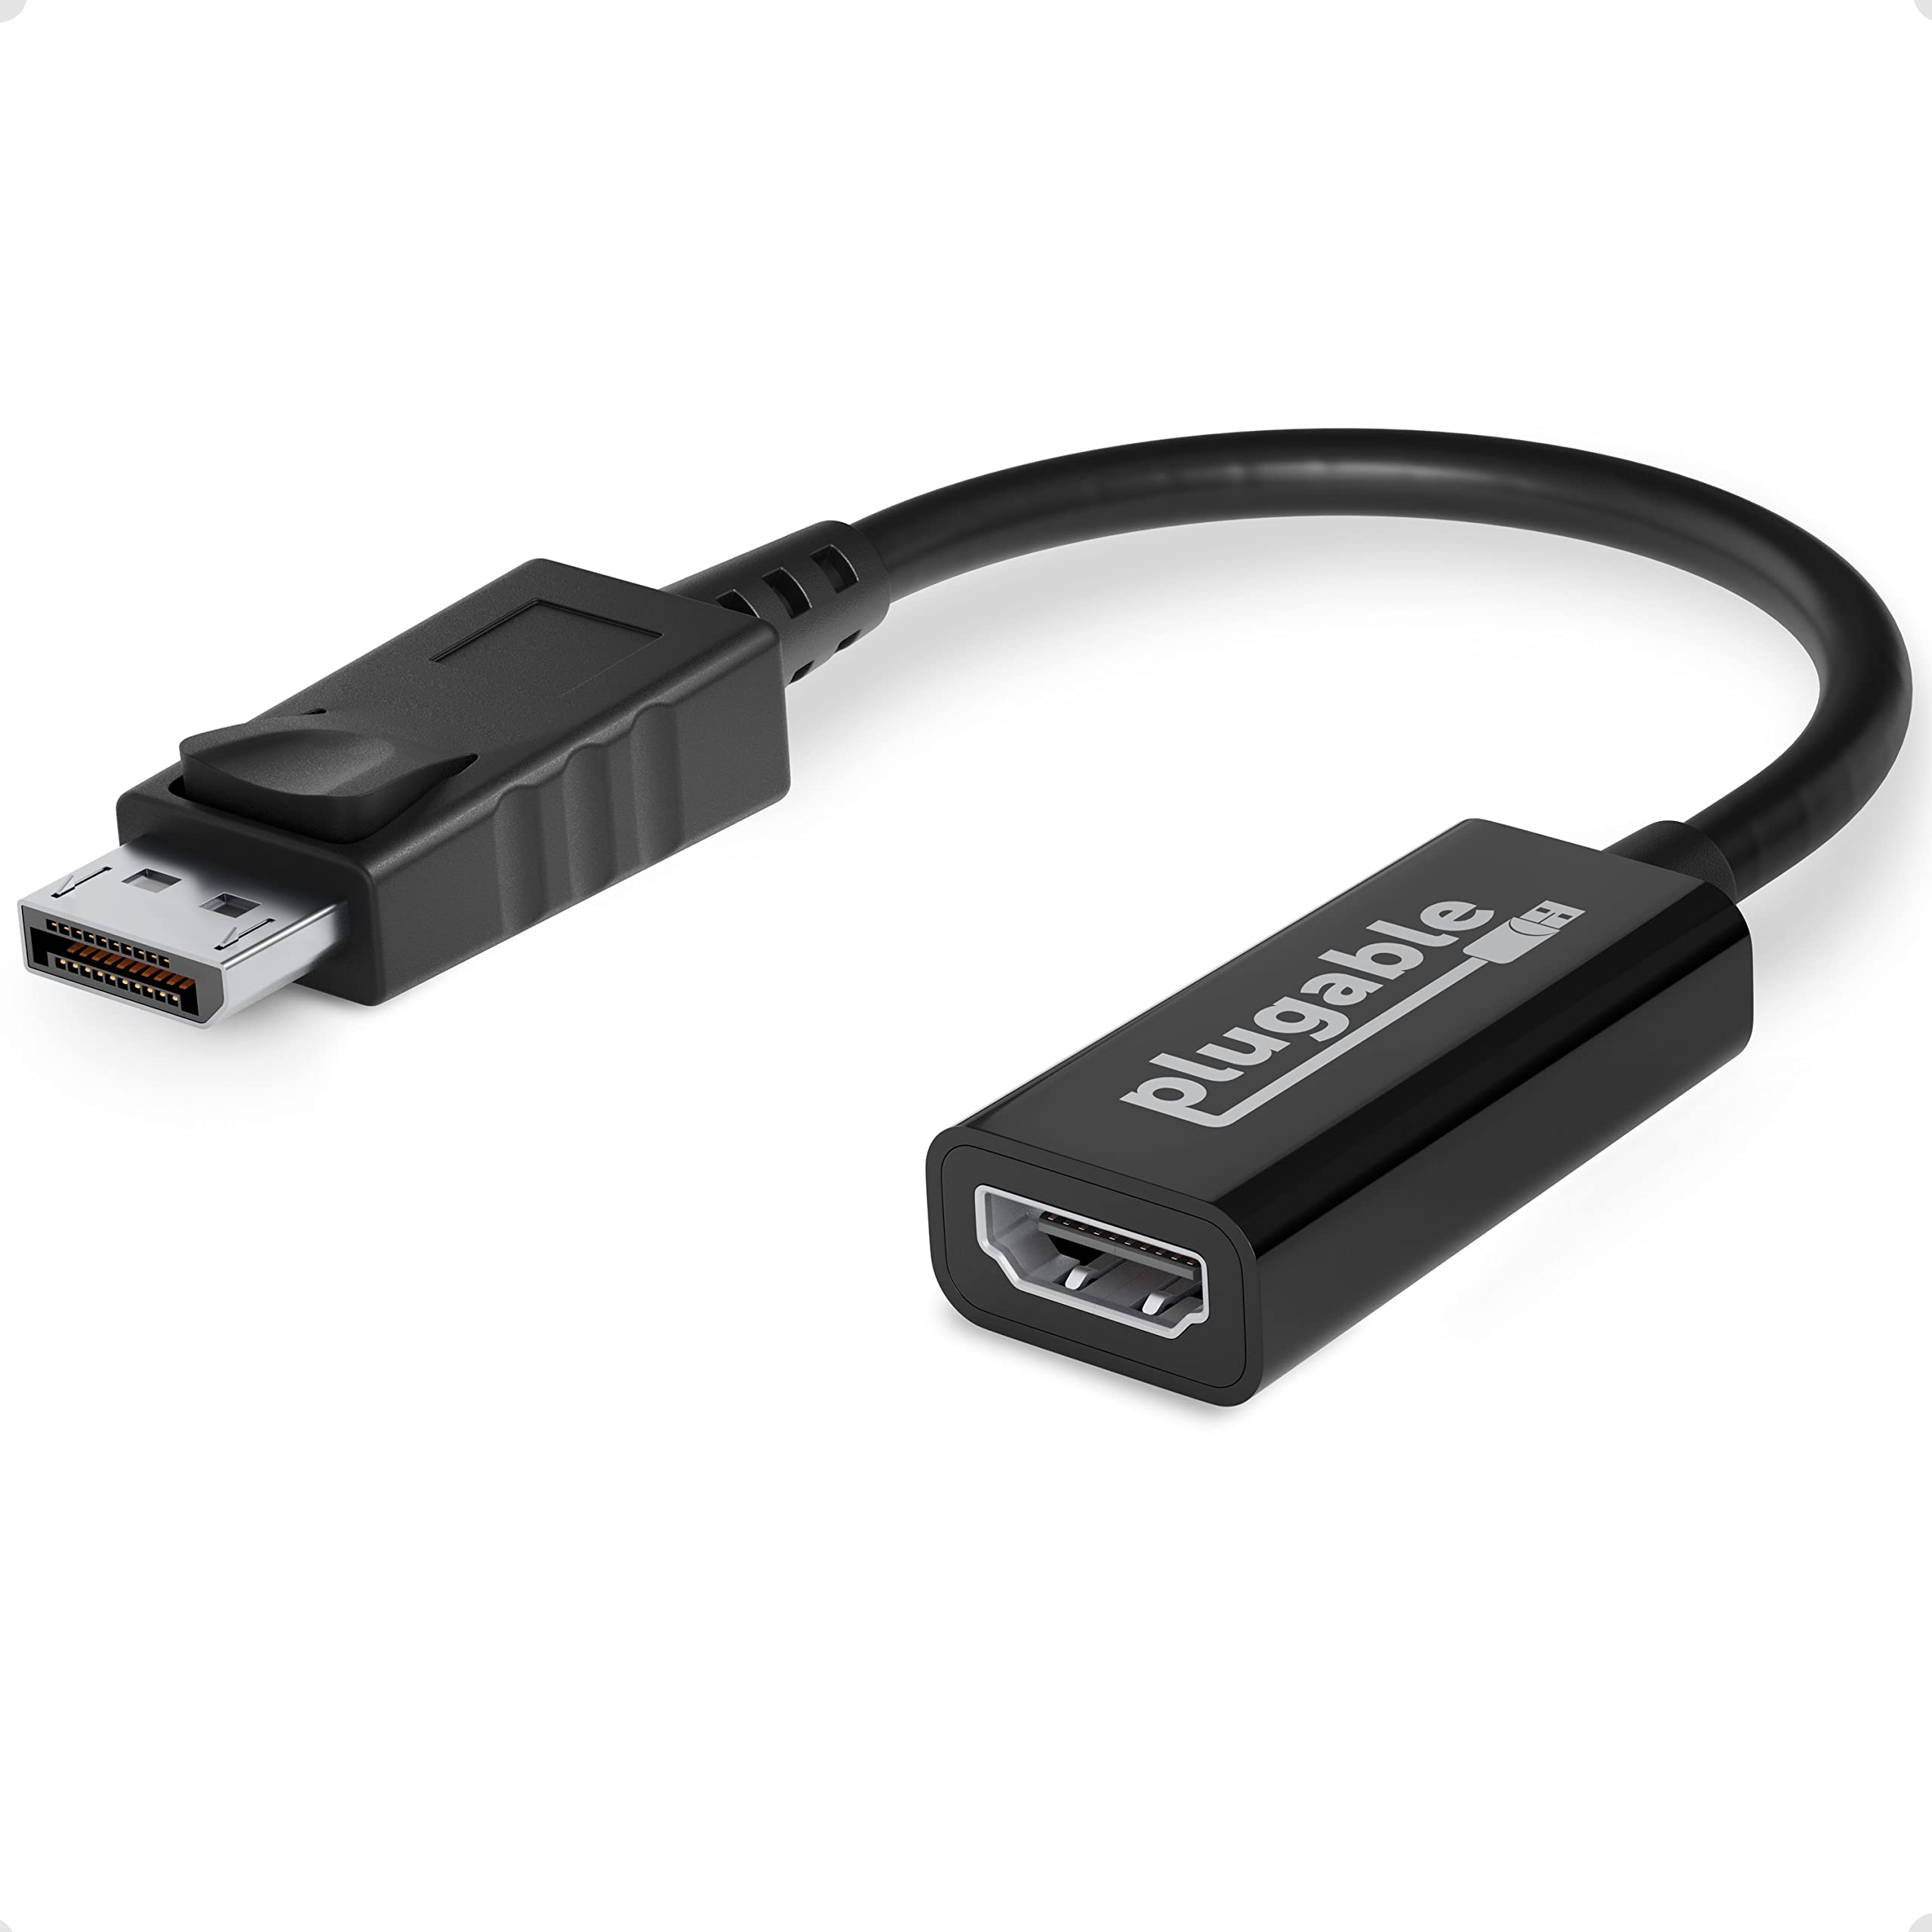 Book Cover Plugable Active DisplayPort to HDMI Adapter, Driverless Connect Any DisplayPort-Enabled PC or Tablet to an HDMI Monitor, TV or Projector for Ultra-HD Streaming (HDMI 2.0 up to 4K 3840x2160 @60Hz)